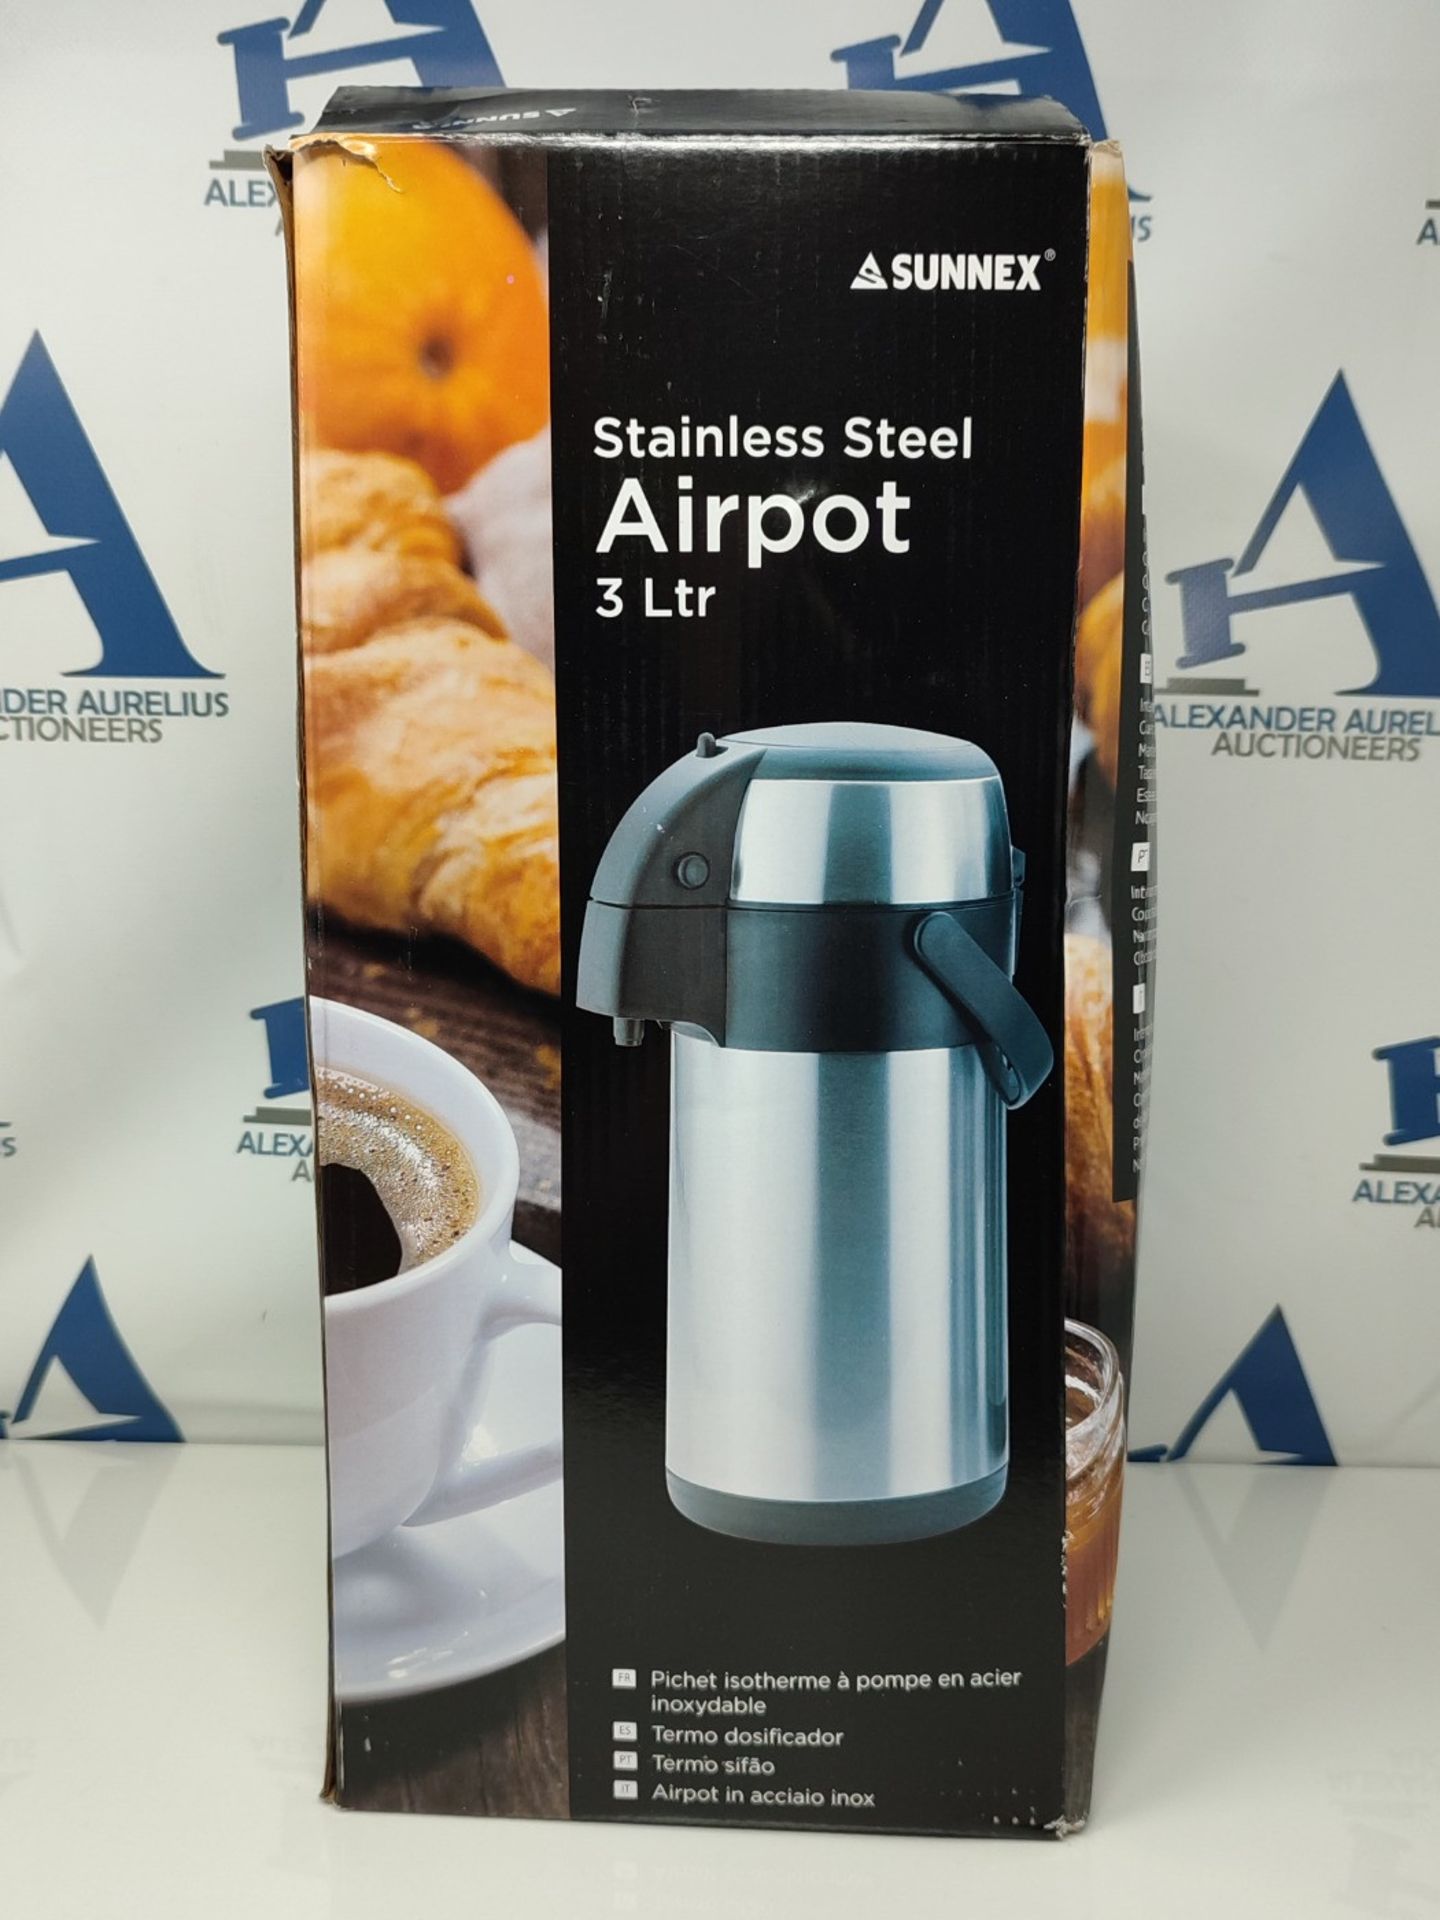 Zodiac ZODC10007-3 Airpot Stainless Steel 3.0 LTR - Image 2 of 3